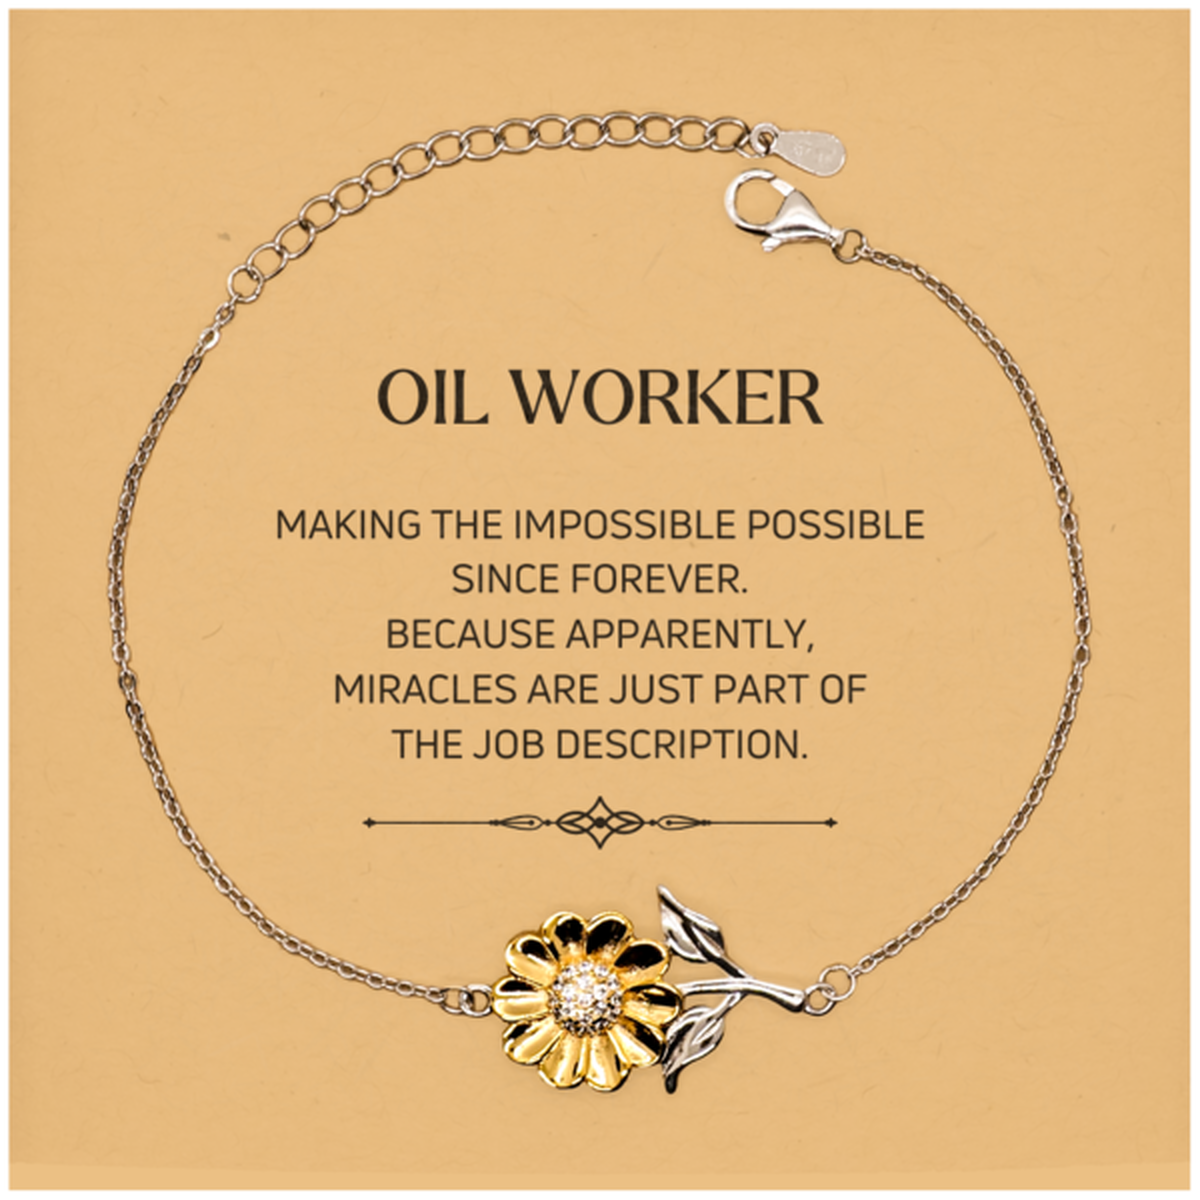 Funny Oil Worker Gifts, Miracles are just part of the job description, Inspirational Birthday Christmas Sunflower Bracelet For Oil Worker, Men, Women, Coworkers, Friends, Boss